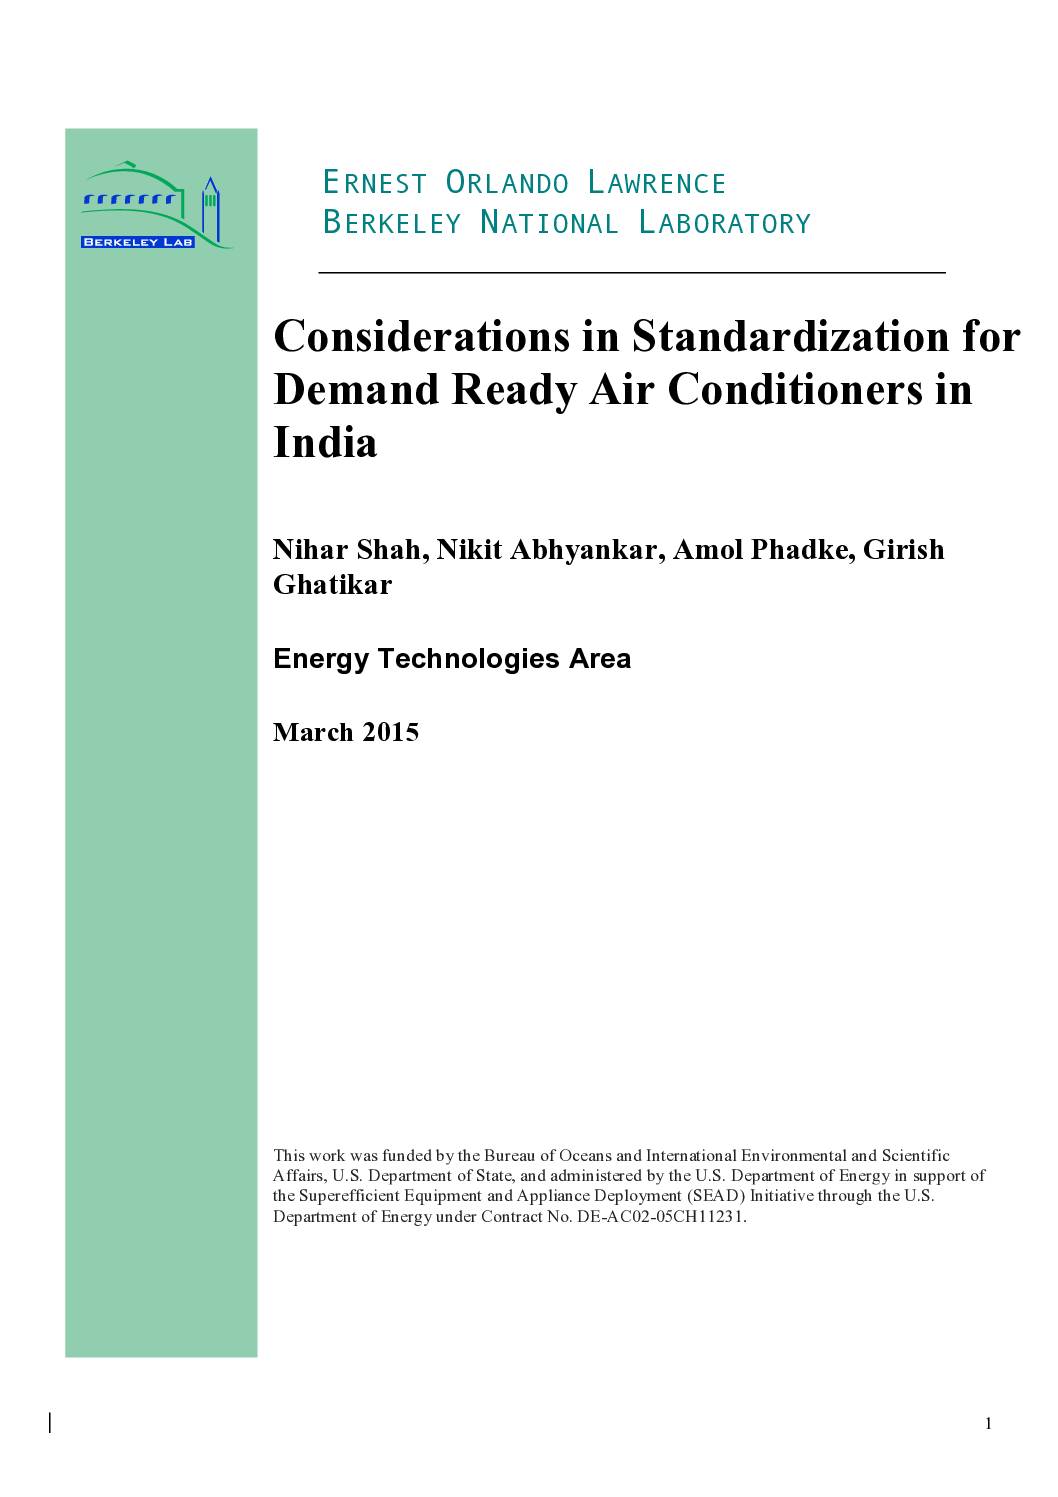 Considerations in Standardization for Demand Ready Air Conditioners in India